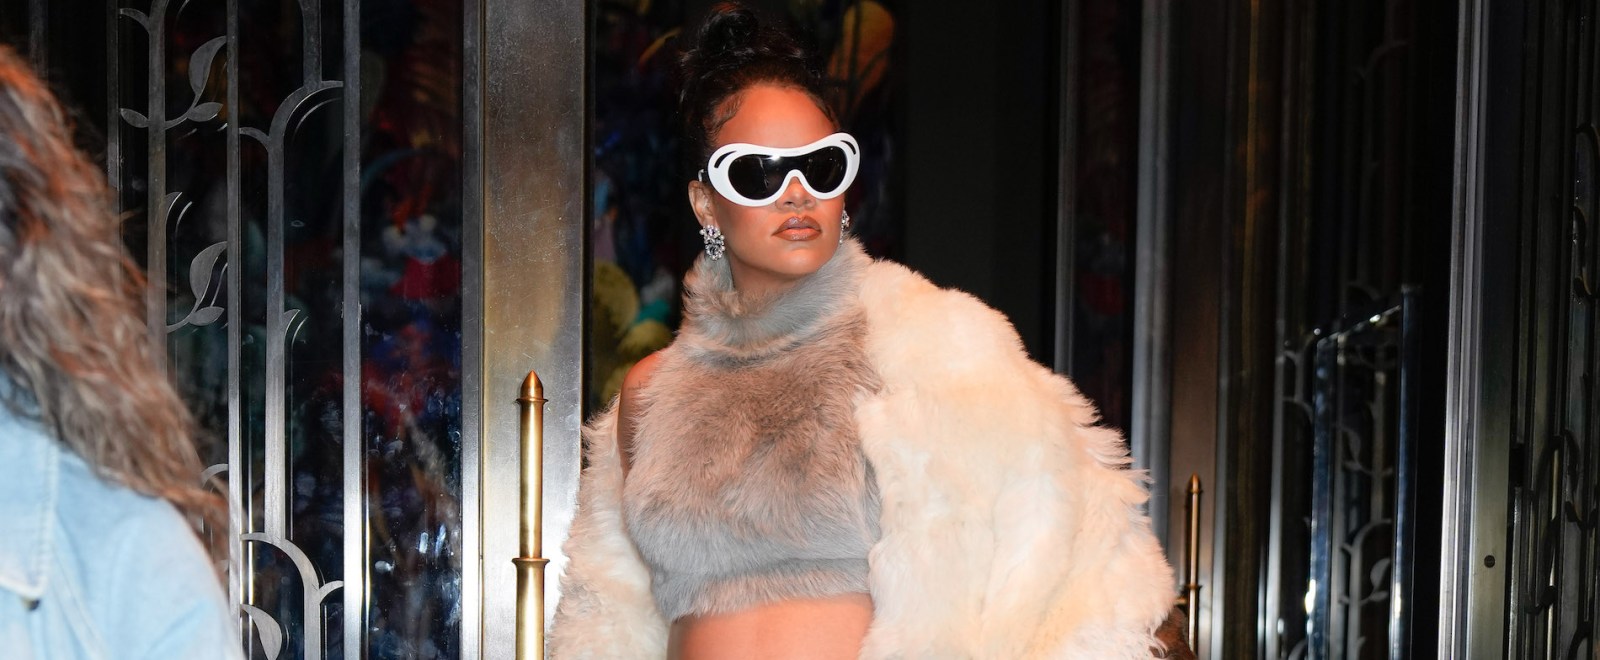 Rihanna’s Iconic Instagram Profile Picture Is Gone After A Decade And Fans Are Mourning The Tragic Loss